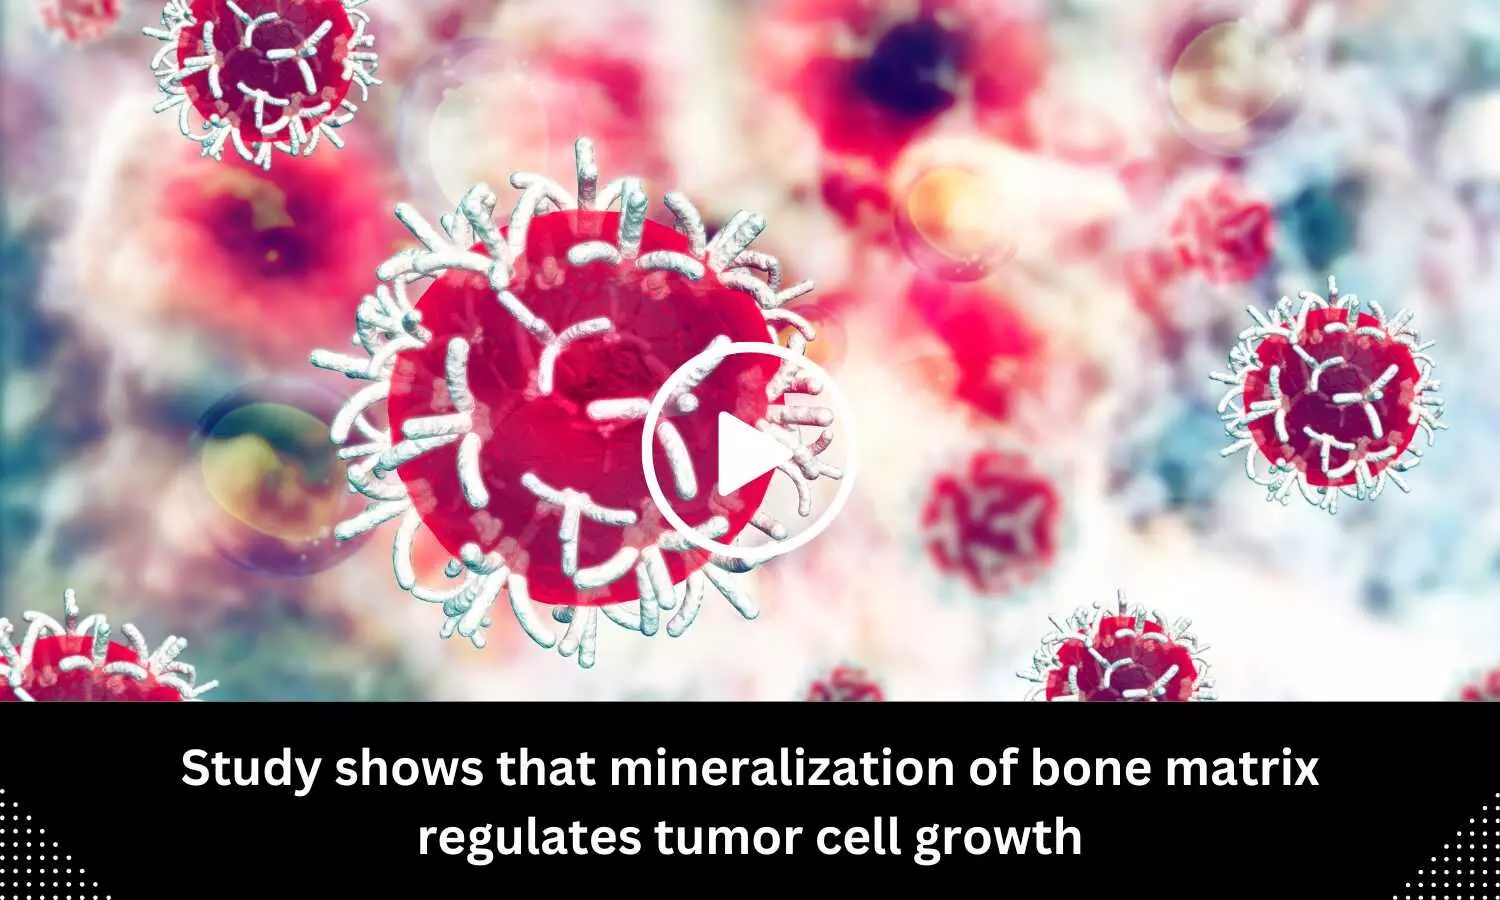 Study shows that mineralization of bone matrix regulates tumor cell growth